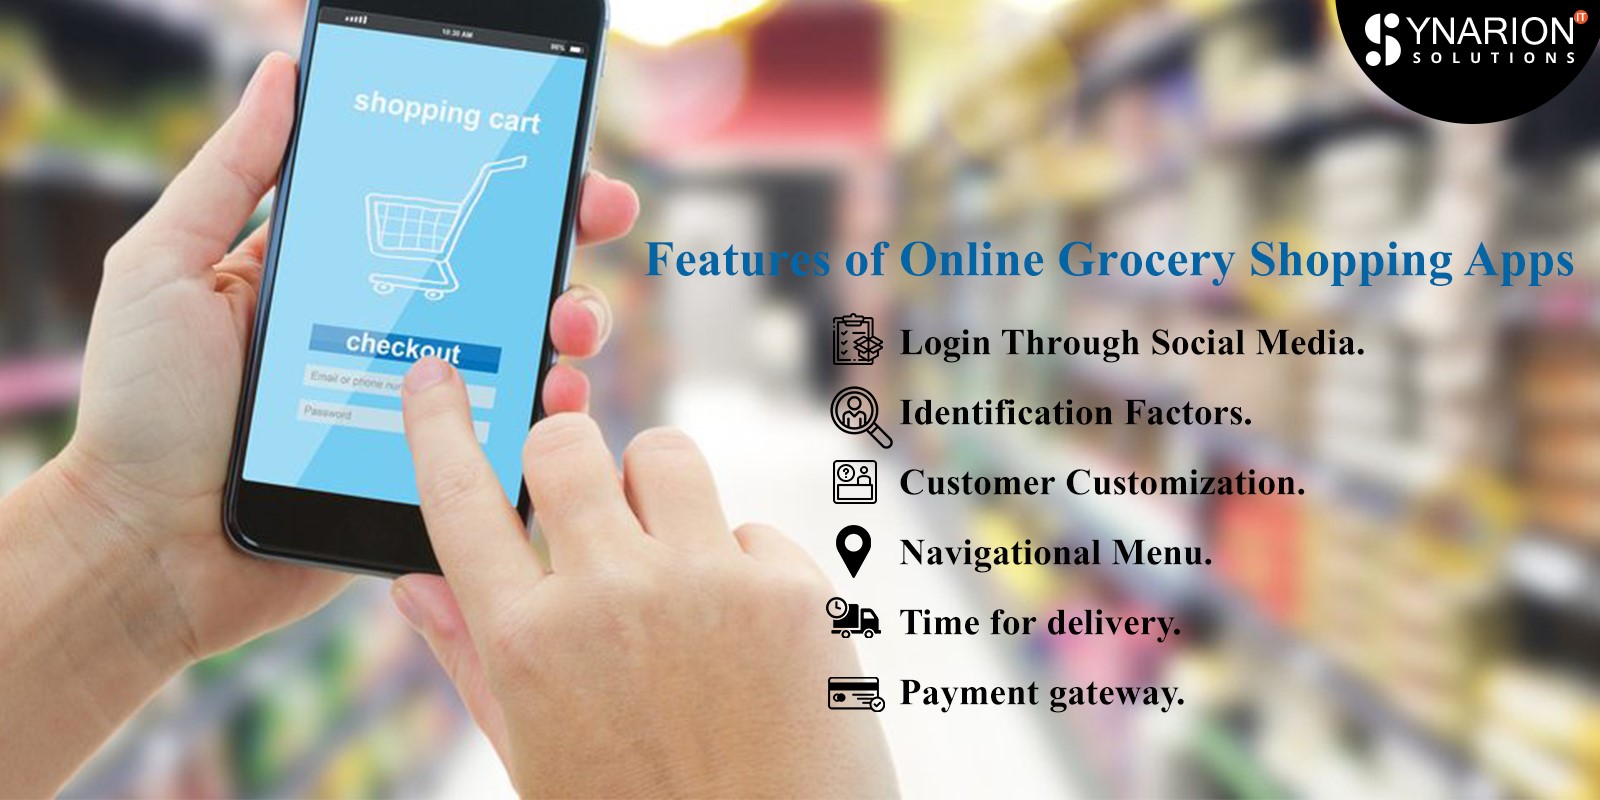 Features of Online Grocery Shopping Apps